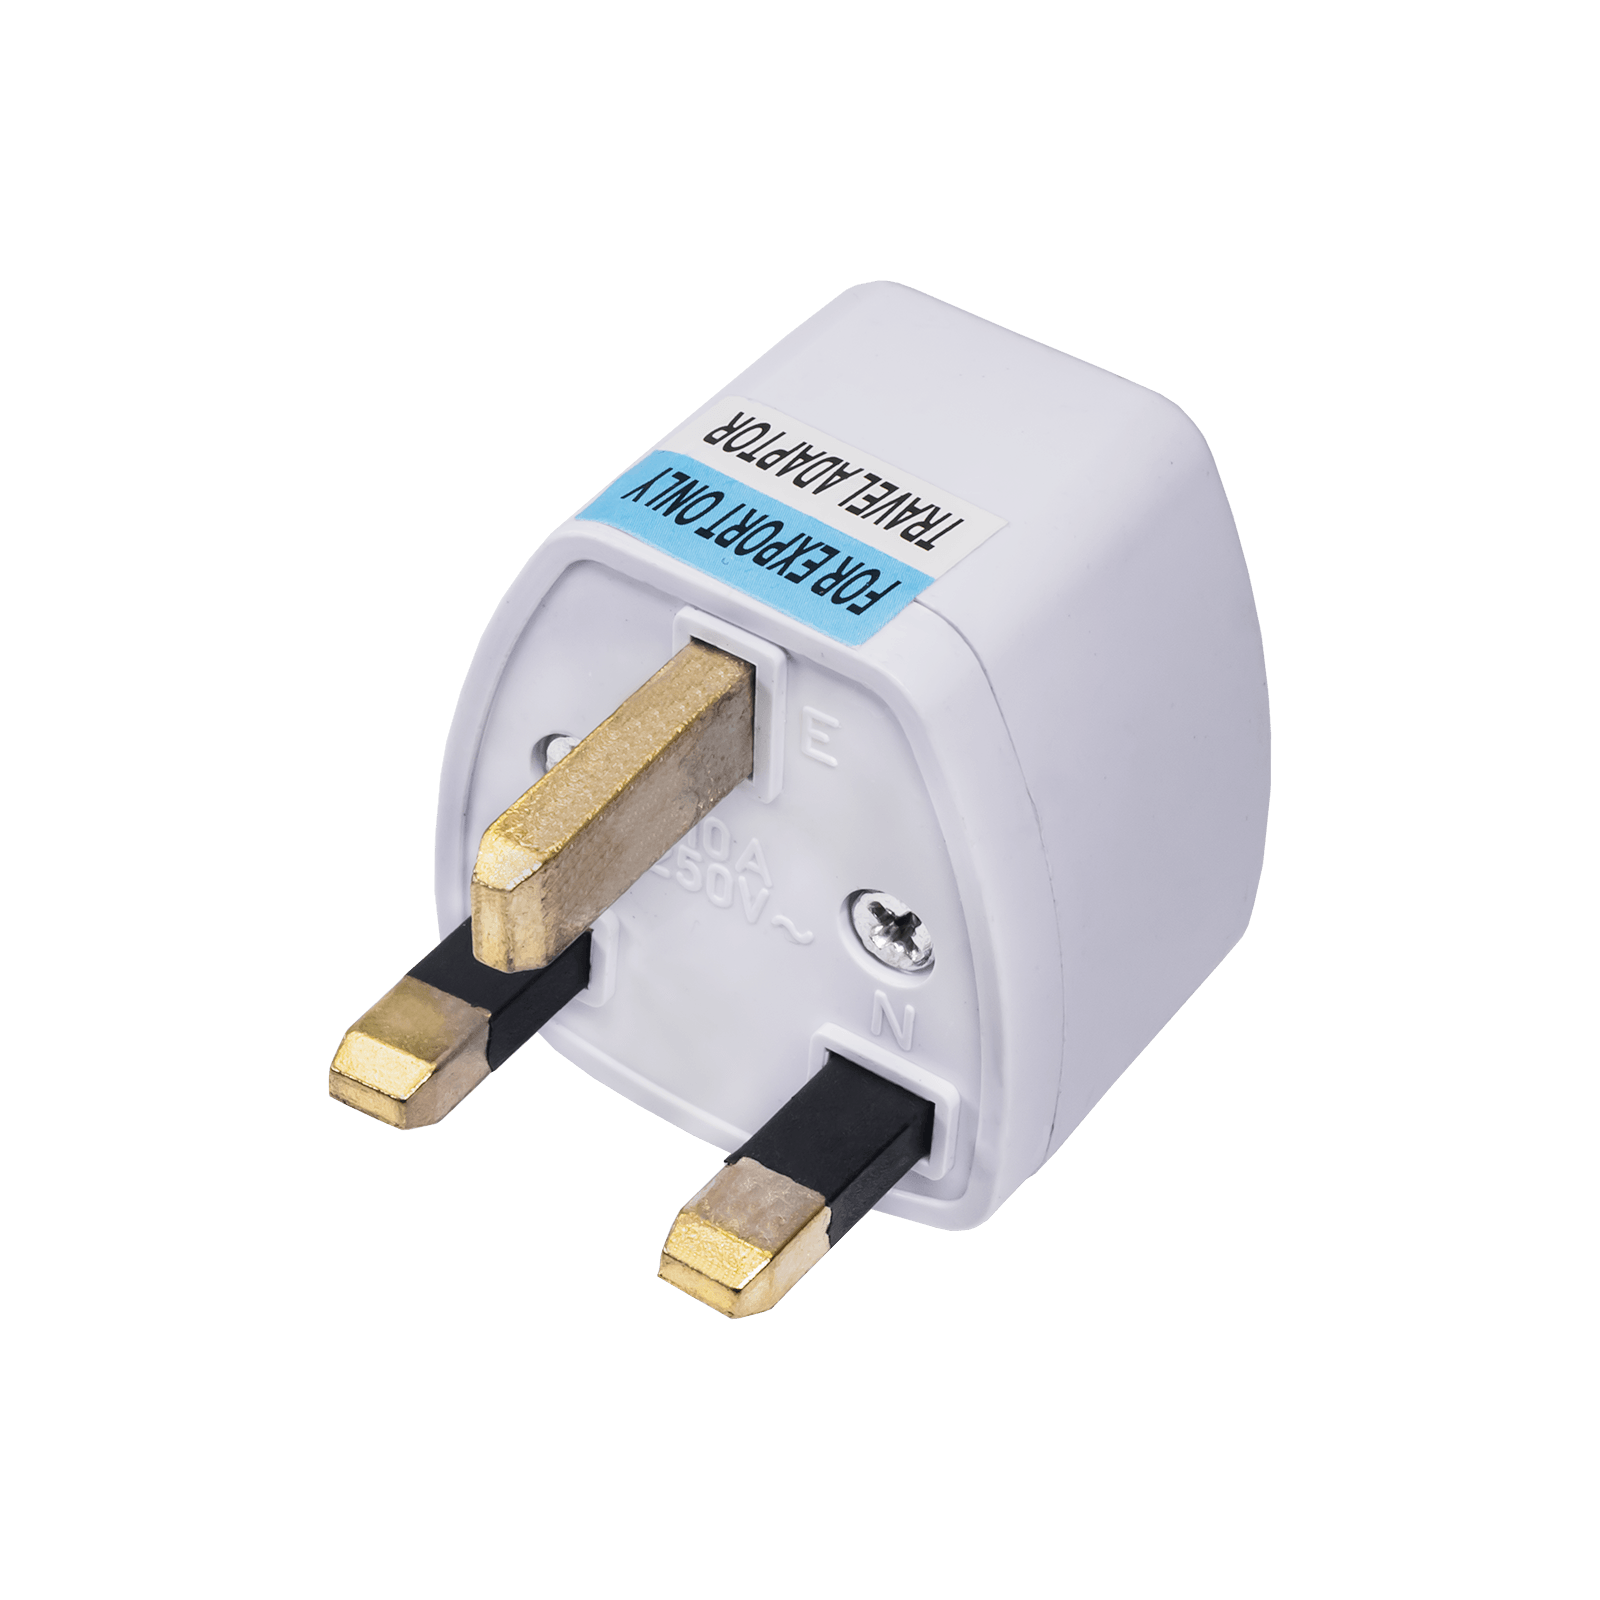 Charger Adapter Free Download PNG HQ PNG Image